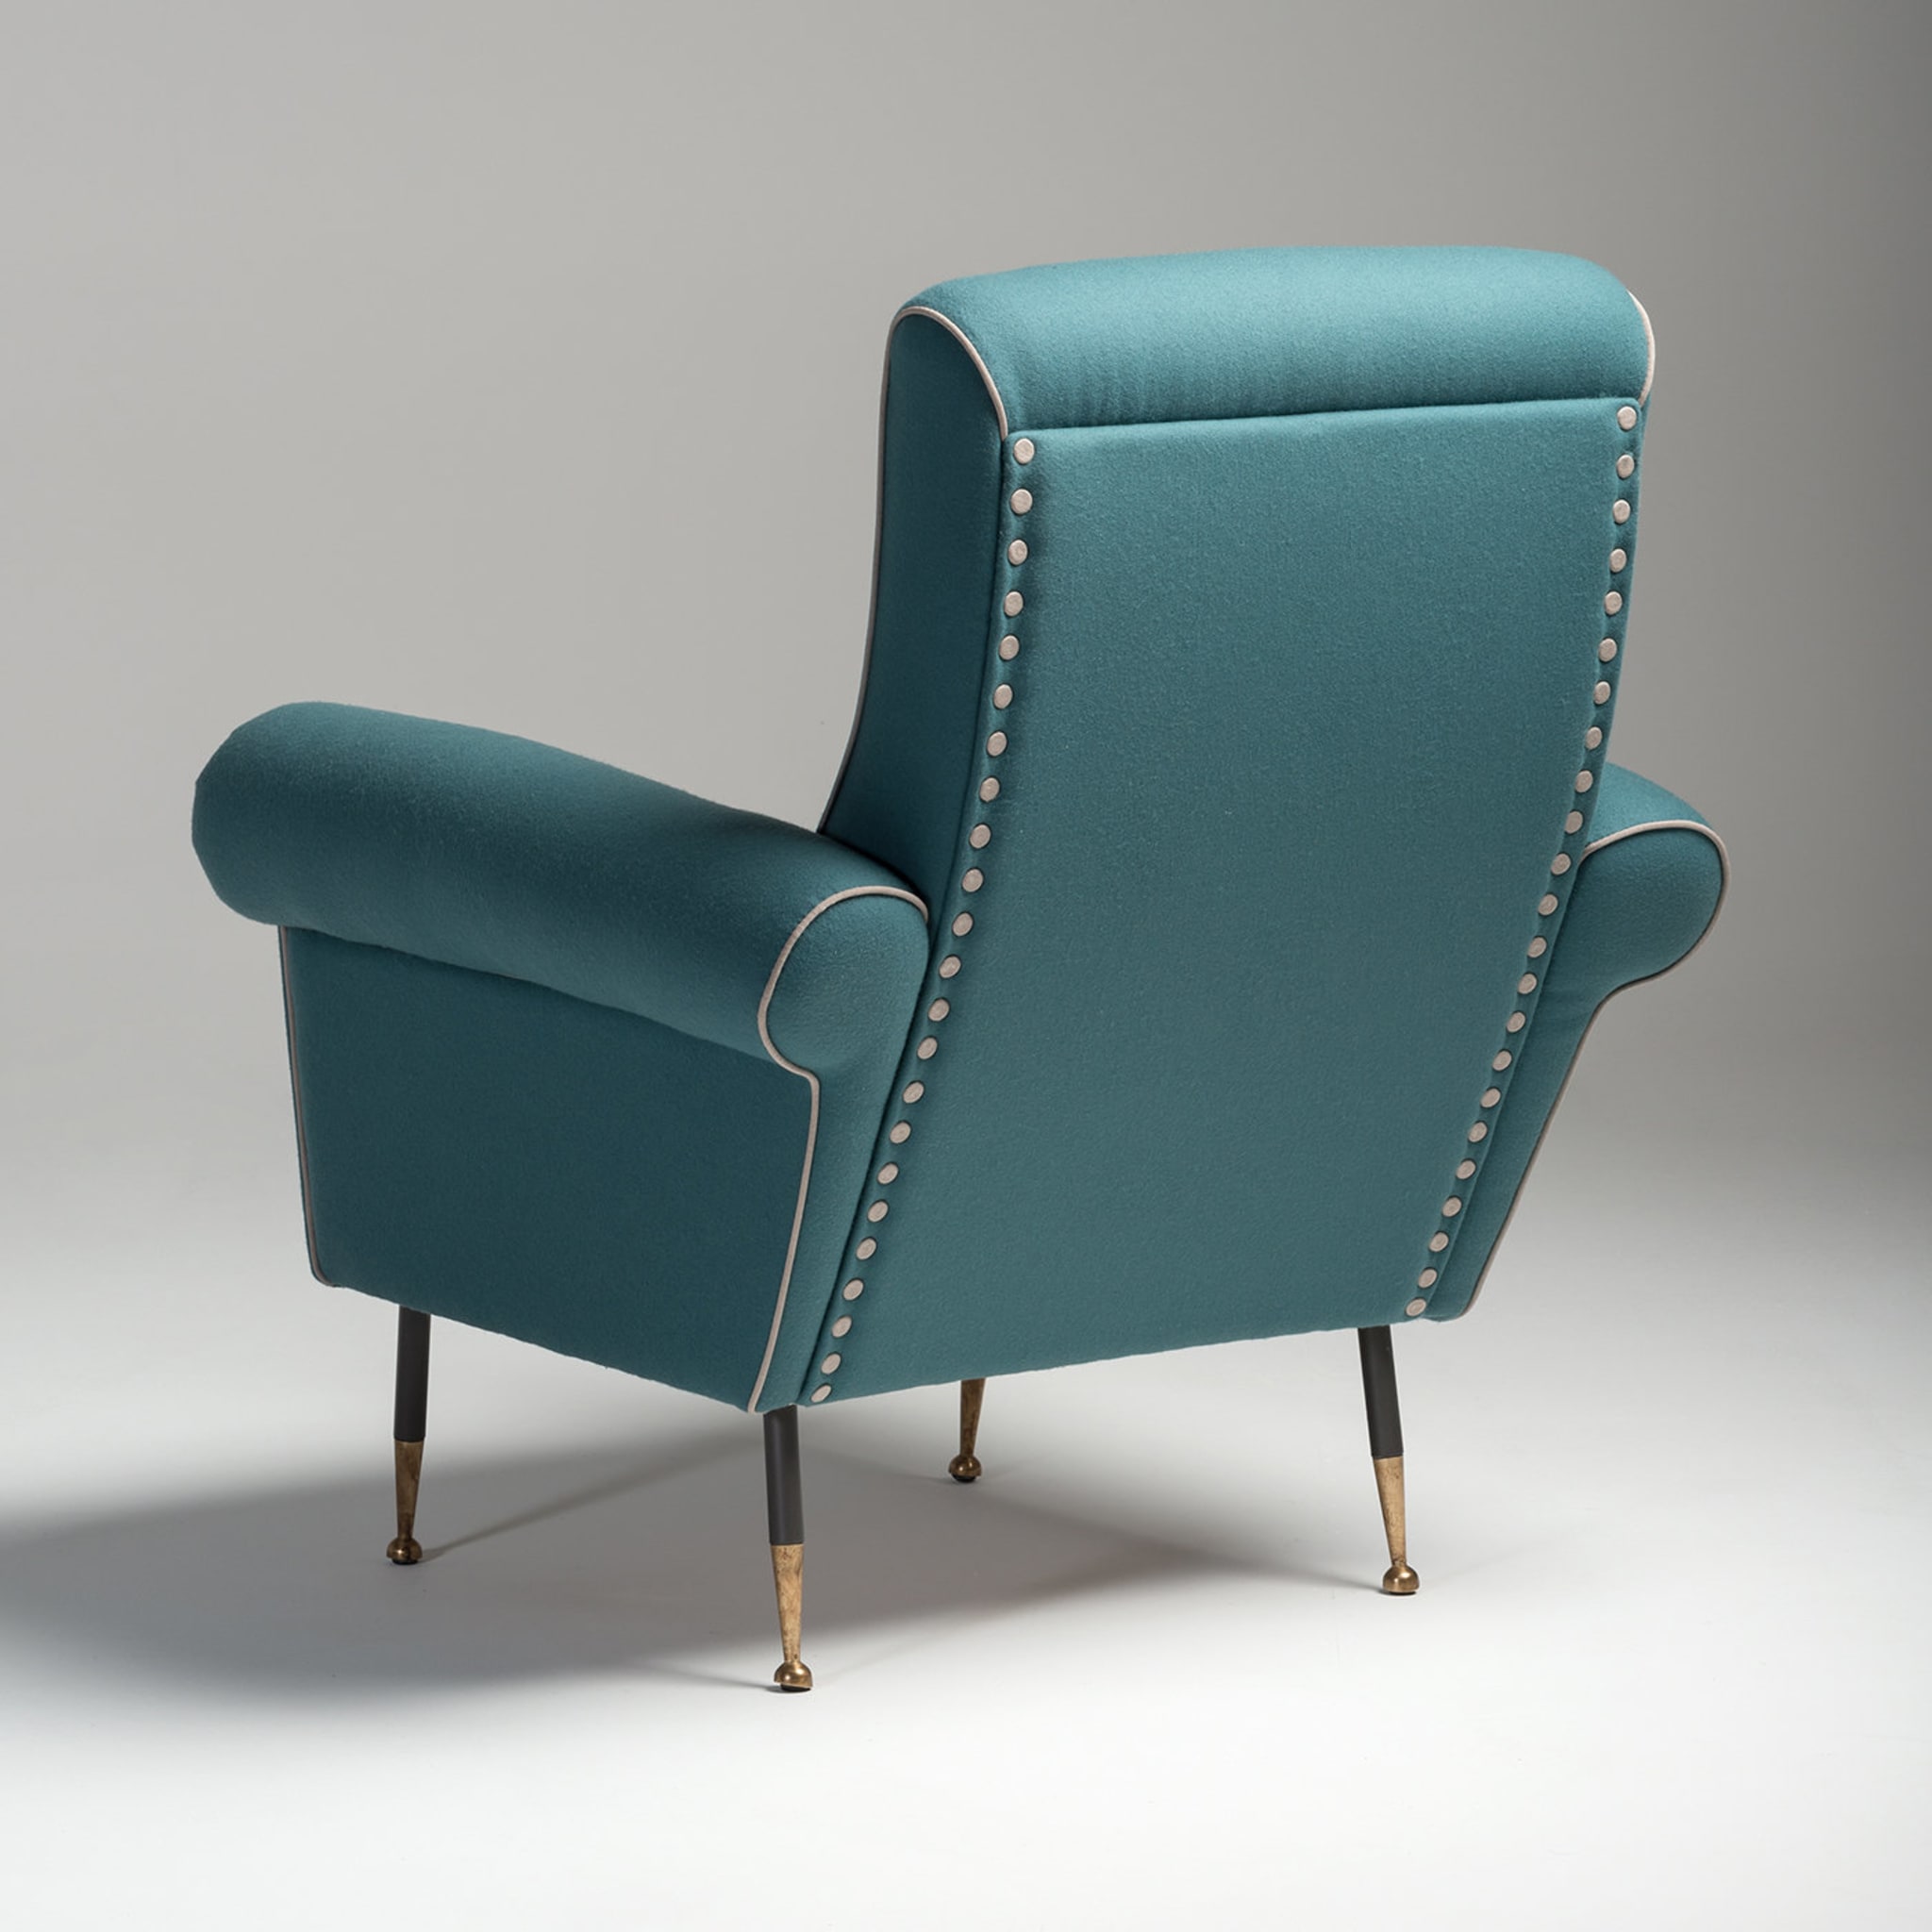 Pulce Armchair Tribeca Collection by Marco and Giulio Mantellassi - Alternative view 1